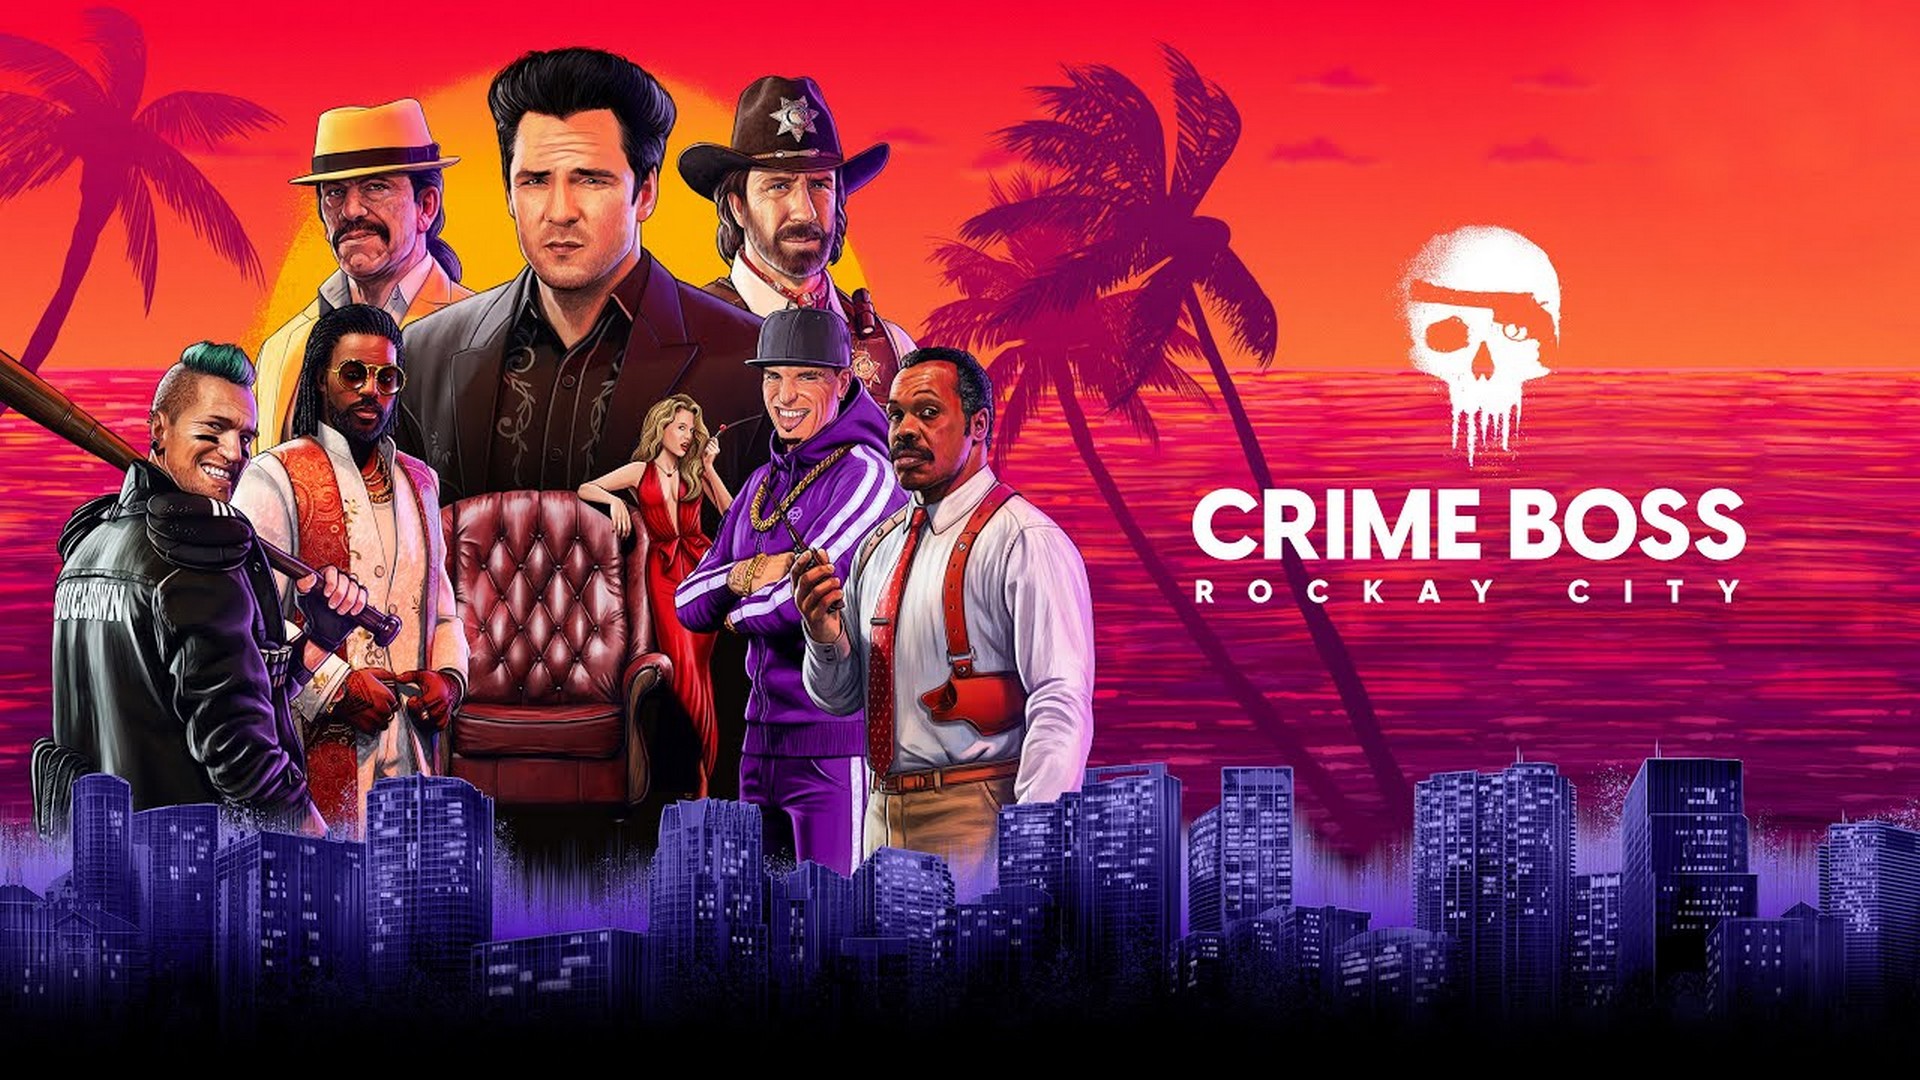 Crime Boss: Rockay City Starts New Criminal Empire On PlayStation 5, Xbox Series X|S – Out Now